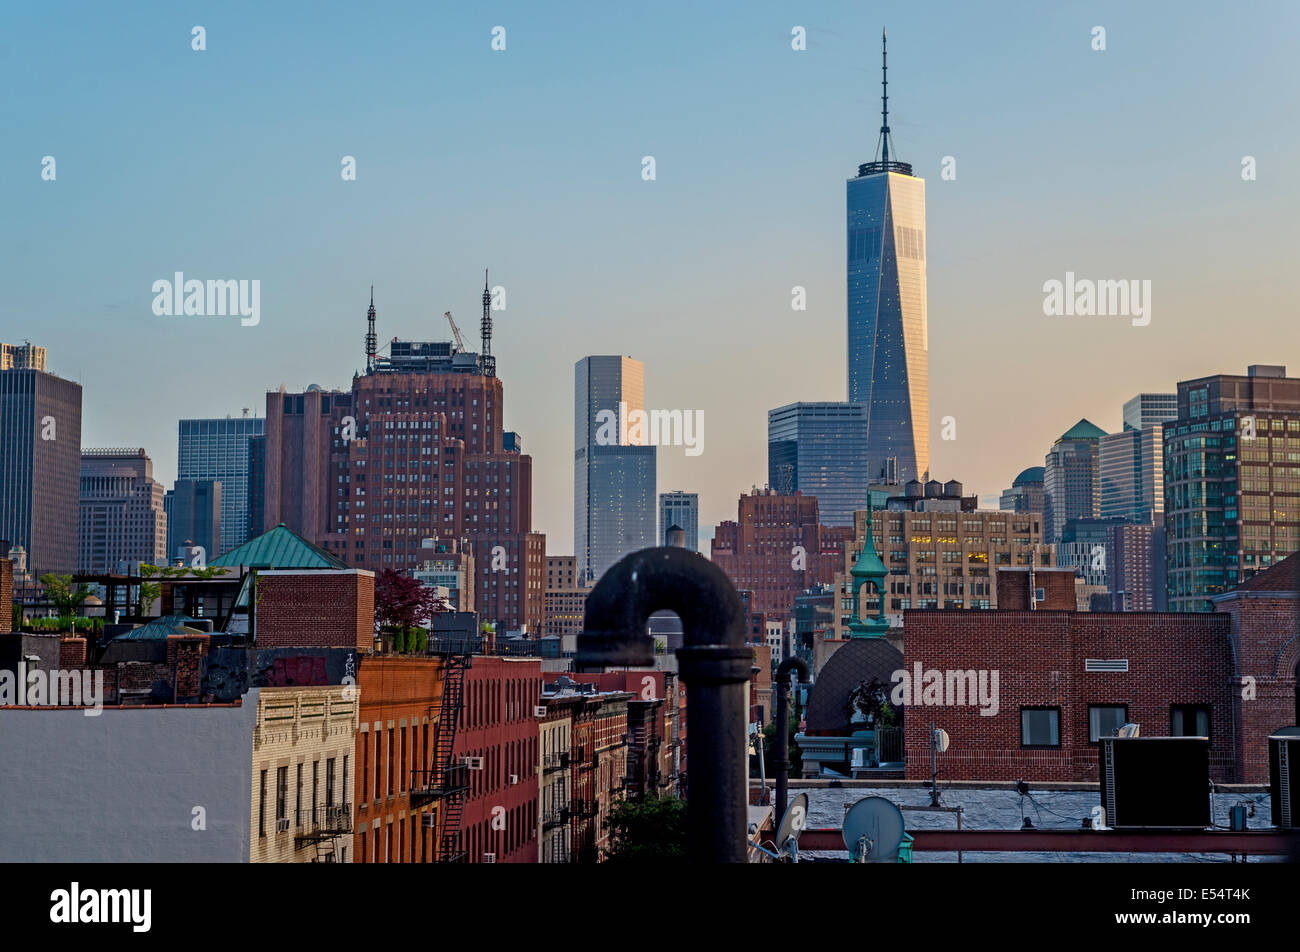 New York, NY 20 July 2014 - One World Trade Center. at sunset, in Lower Manhattan ©Stacy Walsh Rosenstock/Alamy Stock Photo